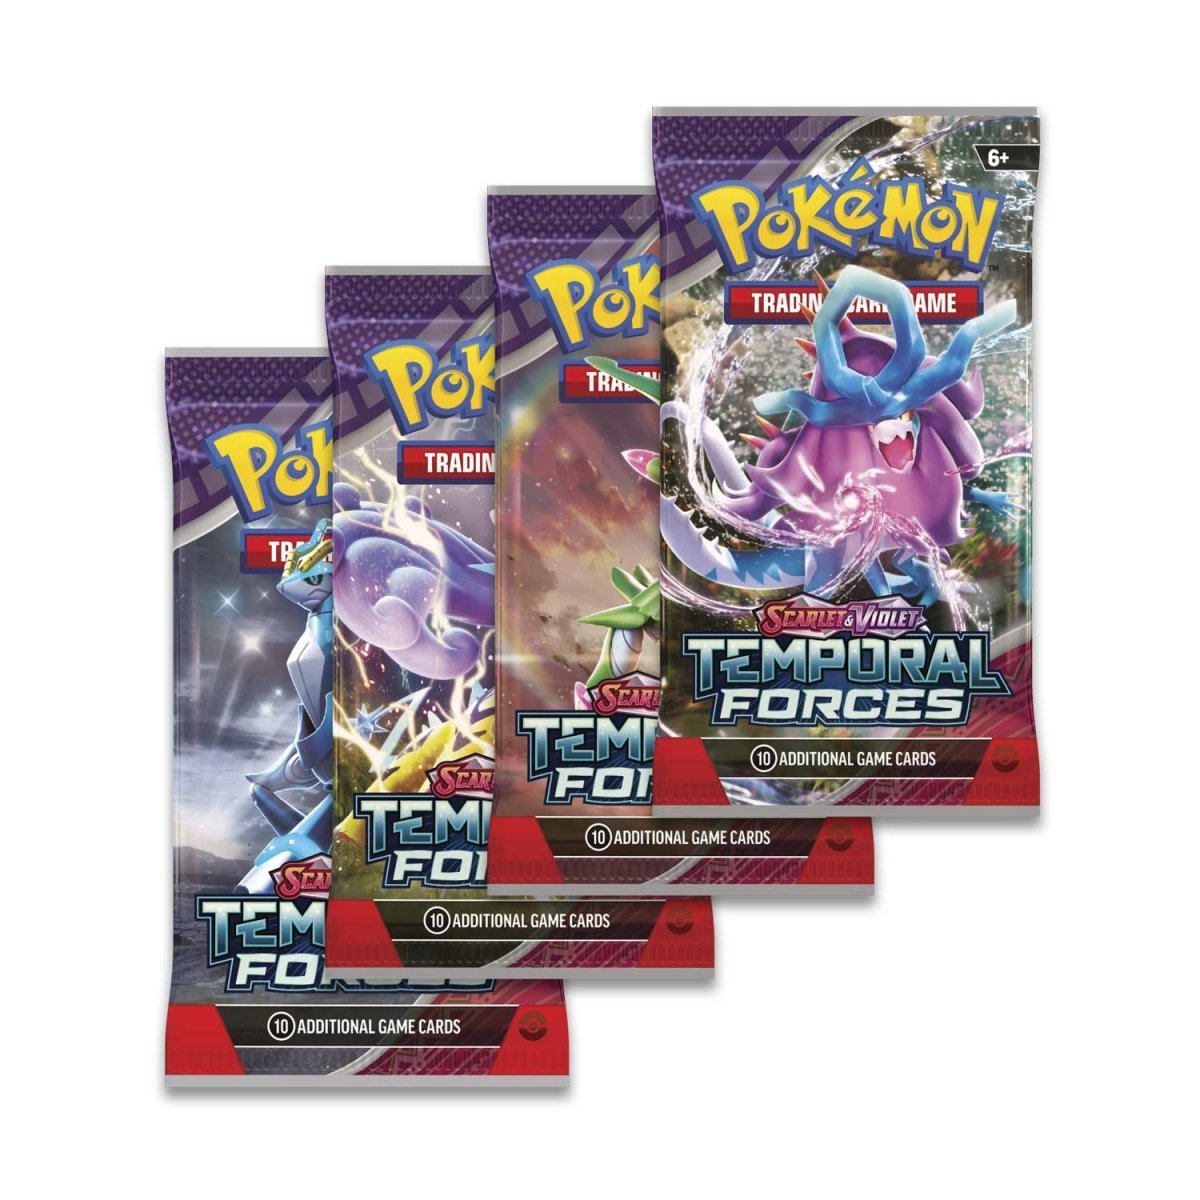 Temporal Forces Booster Box inside